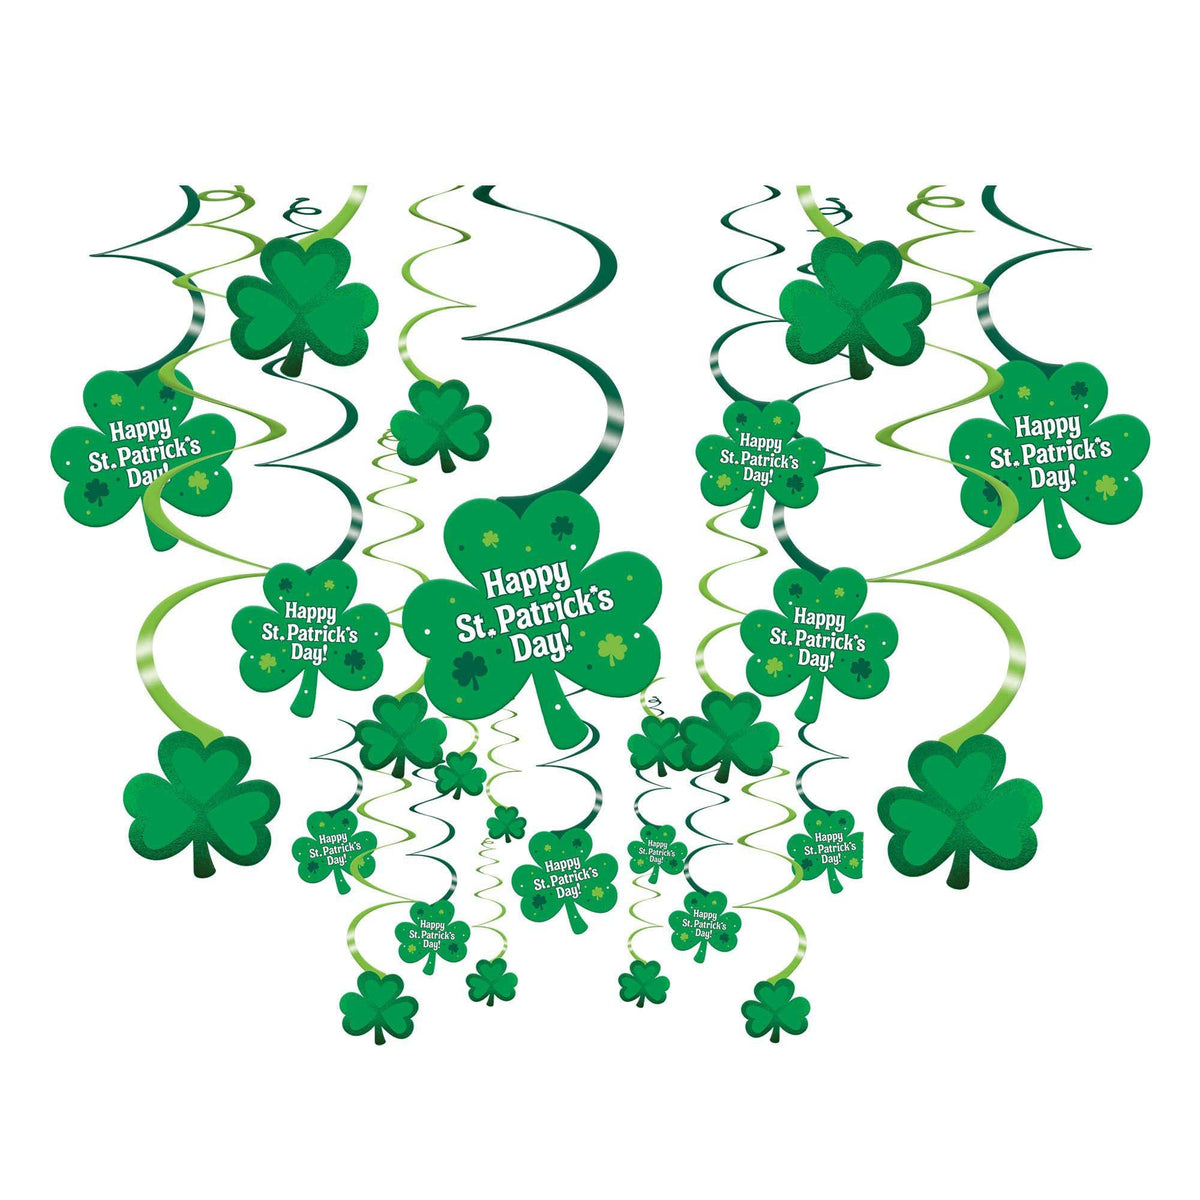 AMSCAN CA St-Patrick St-Patrick's Day Swirl Decoration Kit with Cutouts, 30 Count